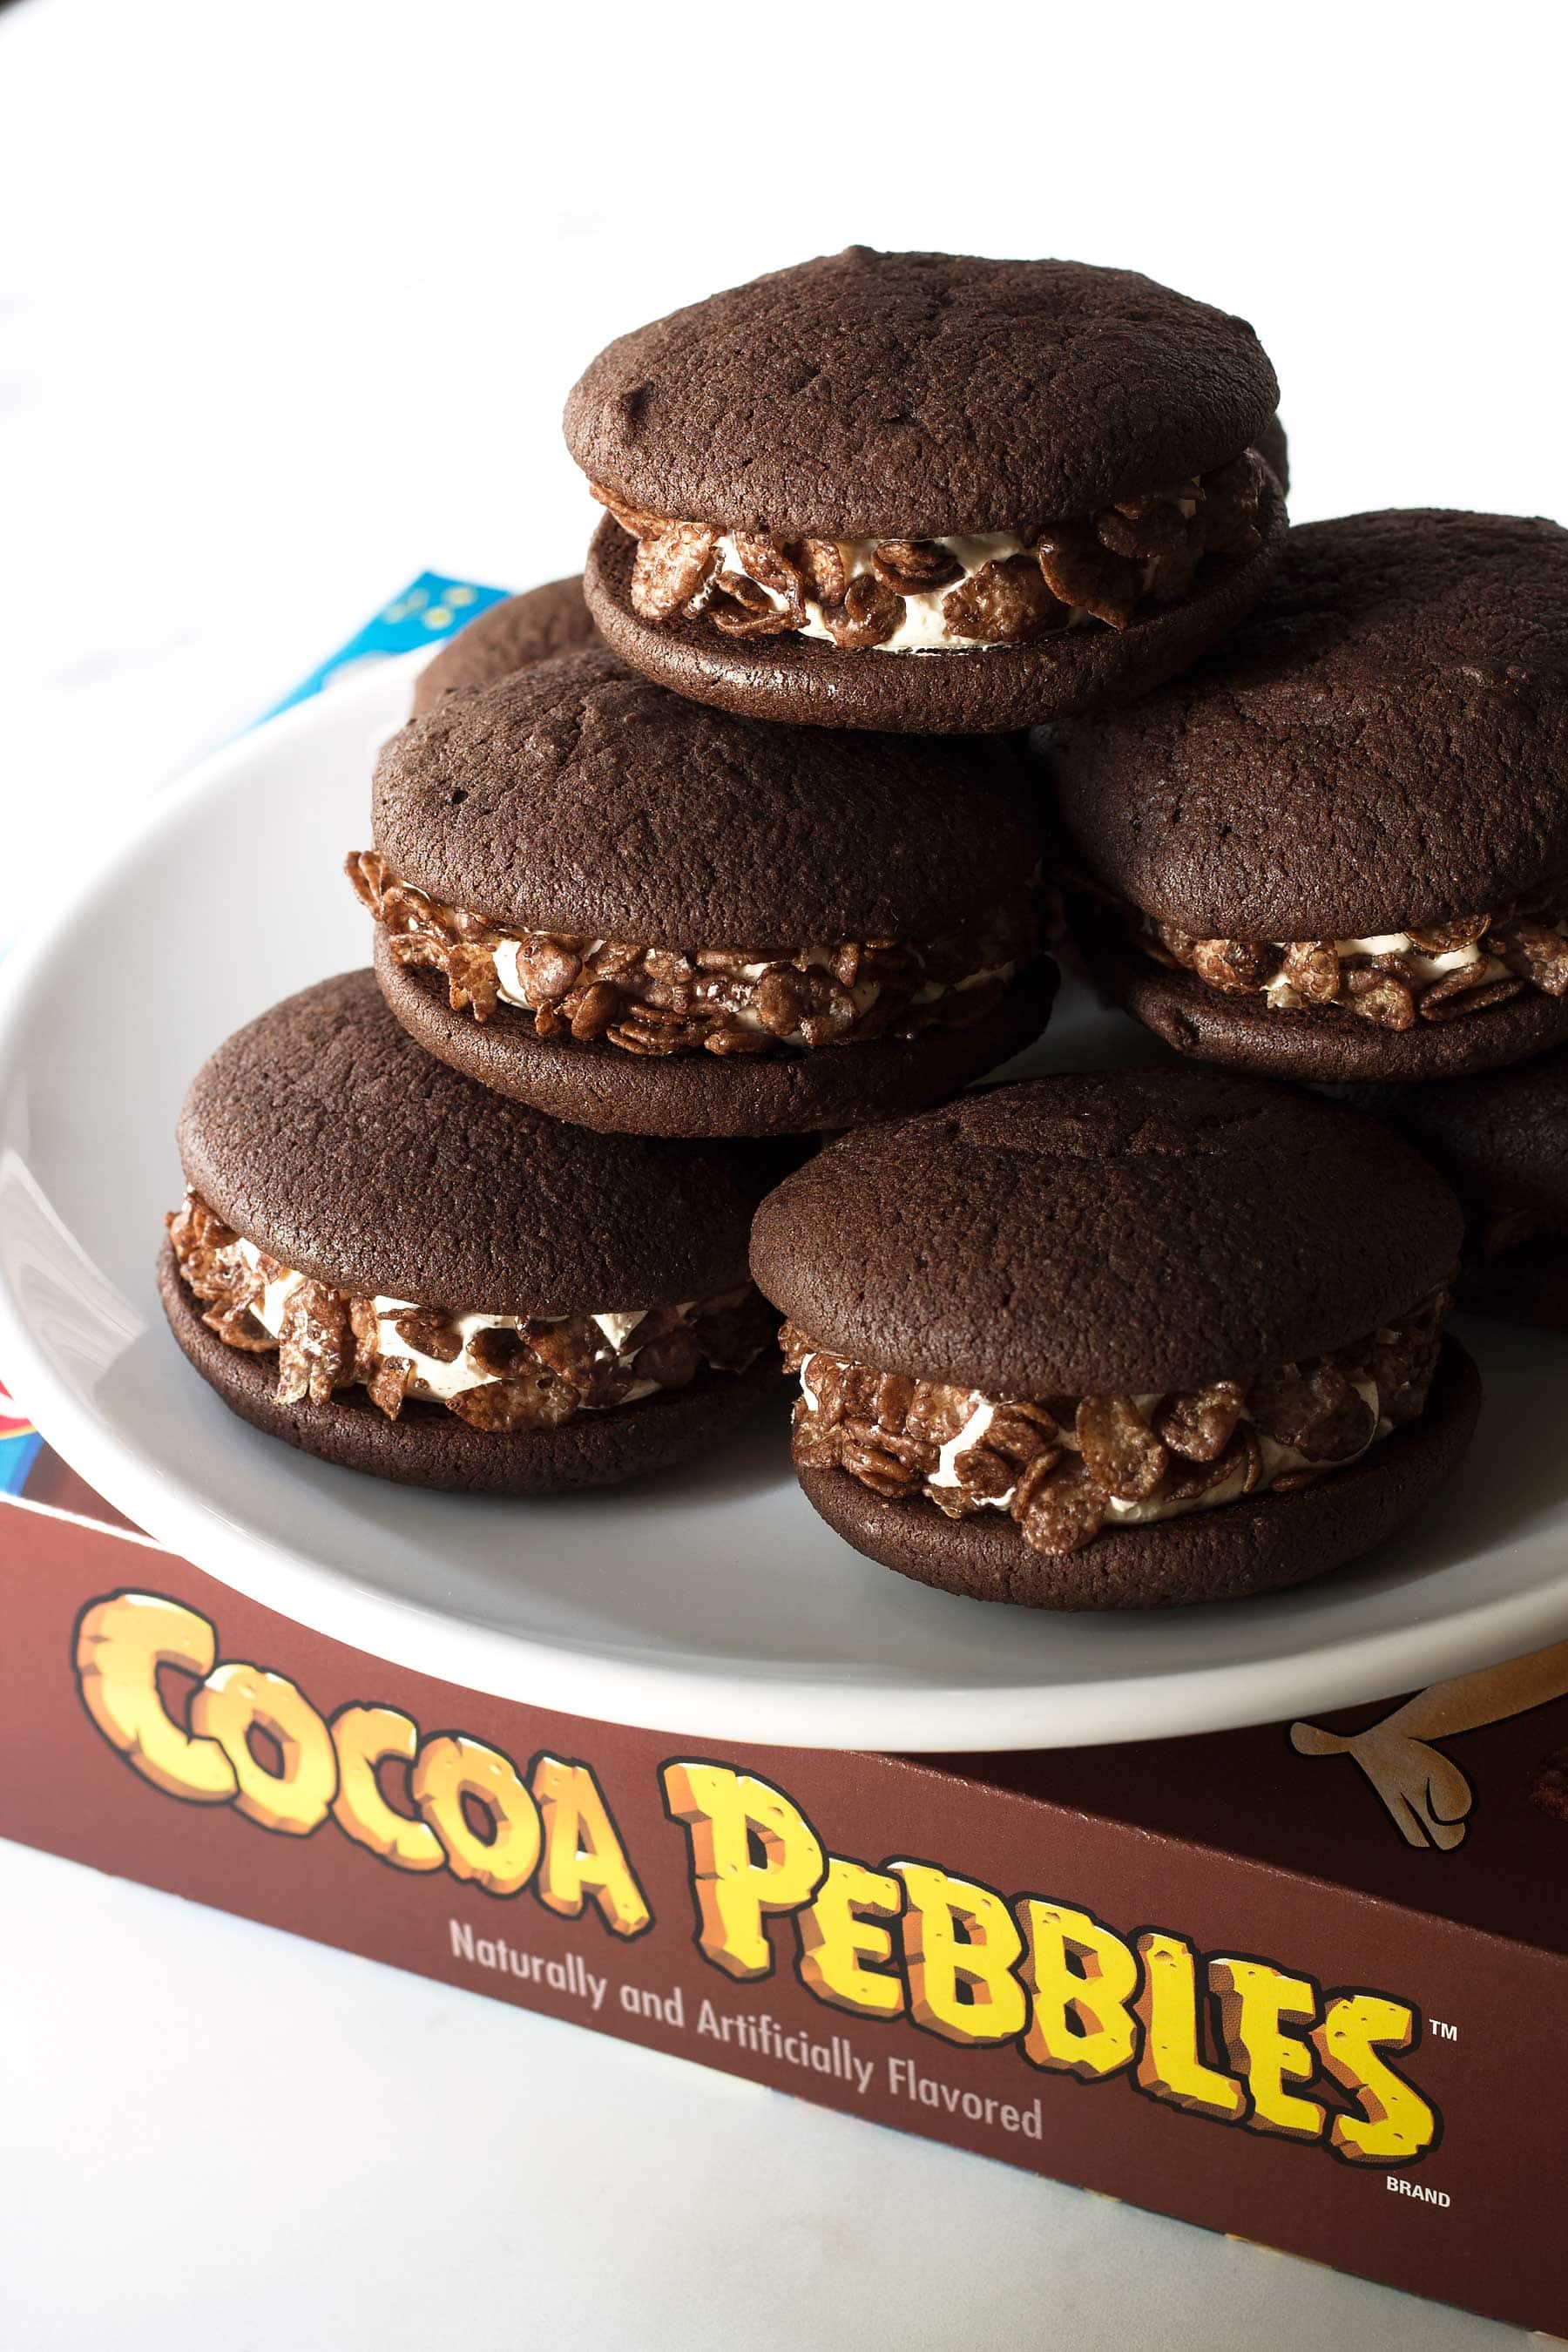 Easy to make and so fun! These delicious chocolaty whoopie pies have a luscious Swiss meringue buttercream and are rolled in crispy Cocoa PEBBLES™ for a nice crunch! And it's all gluten free! This recipe is the perfect dessert to round out a fun family weekend. #glutenfree #ad #glutenfreebaking #maple #coconutsugar #glutenfreedessert #glutenfreewhoopiepies #whoopiepies #buttercream #swissmeringuebuttercream #cocoapebbles #paleoish #holidaybaking #breakfastcereal #nostalgia 